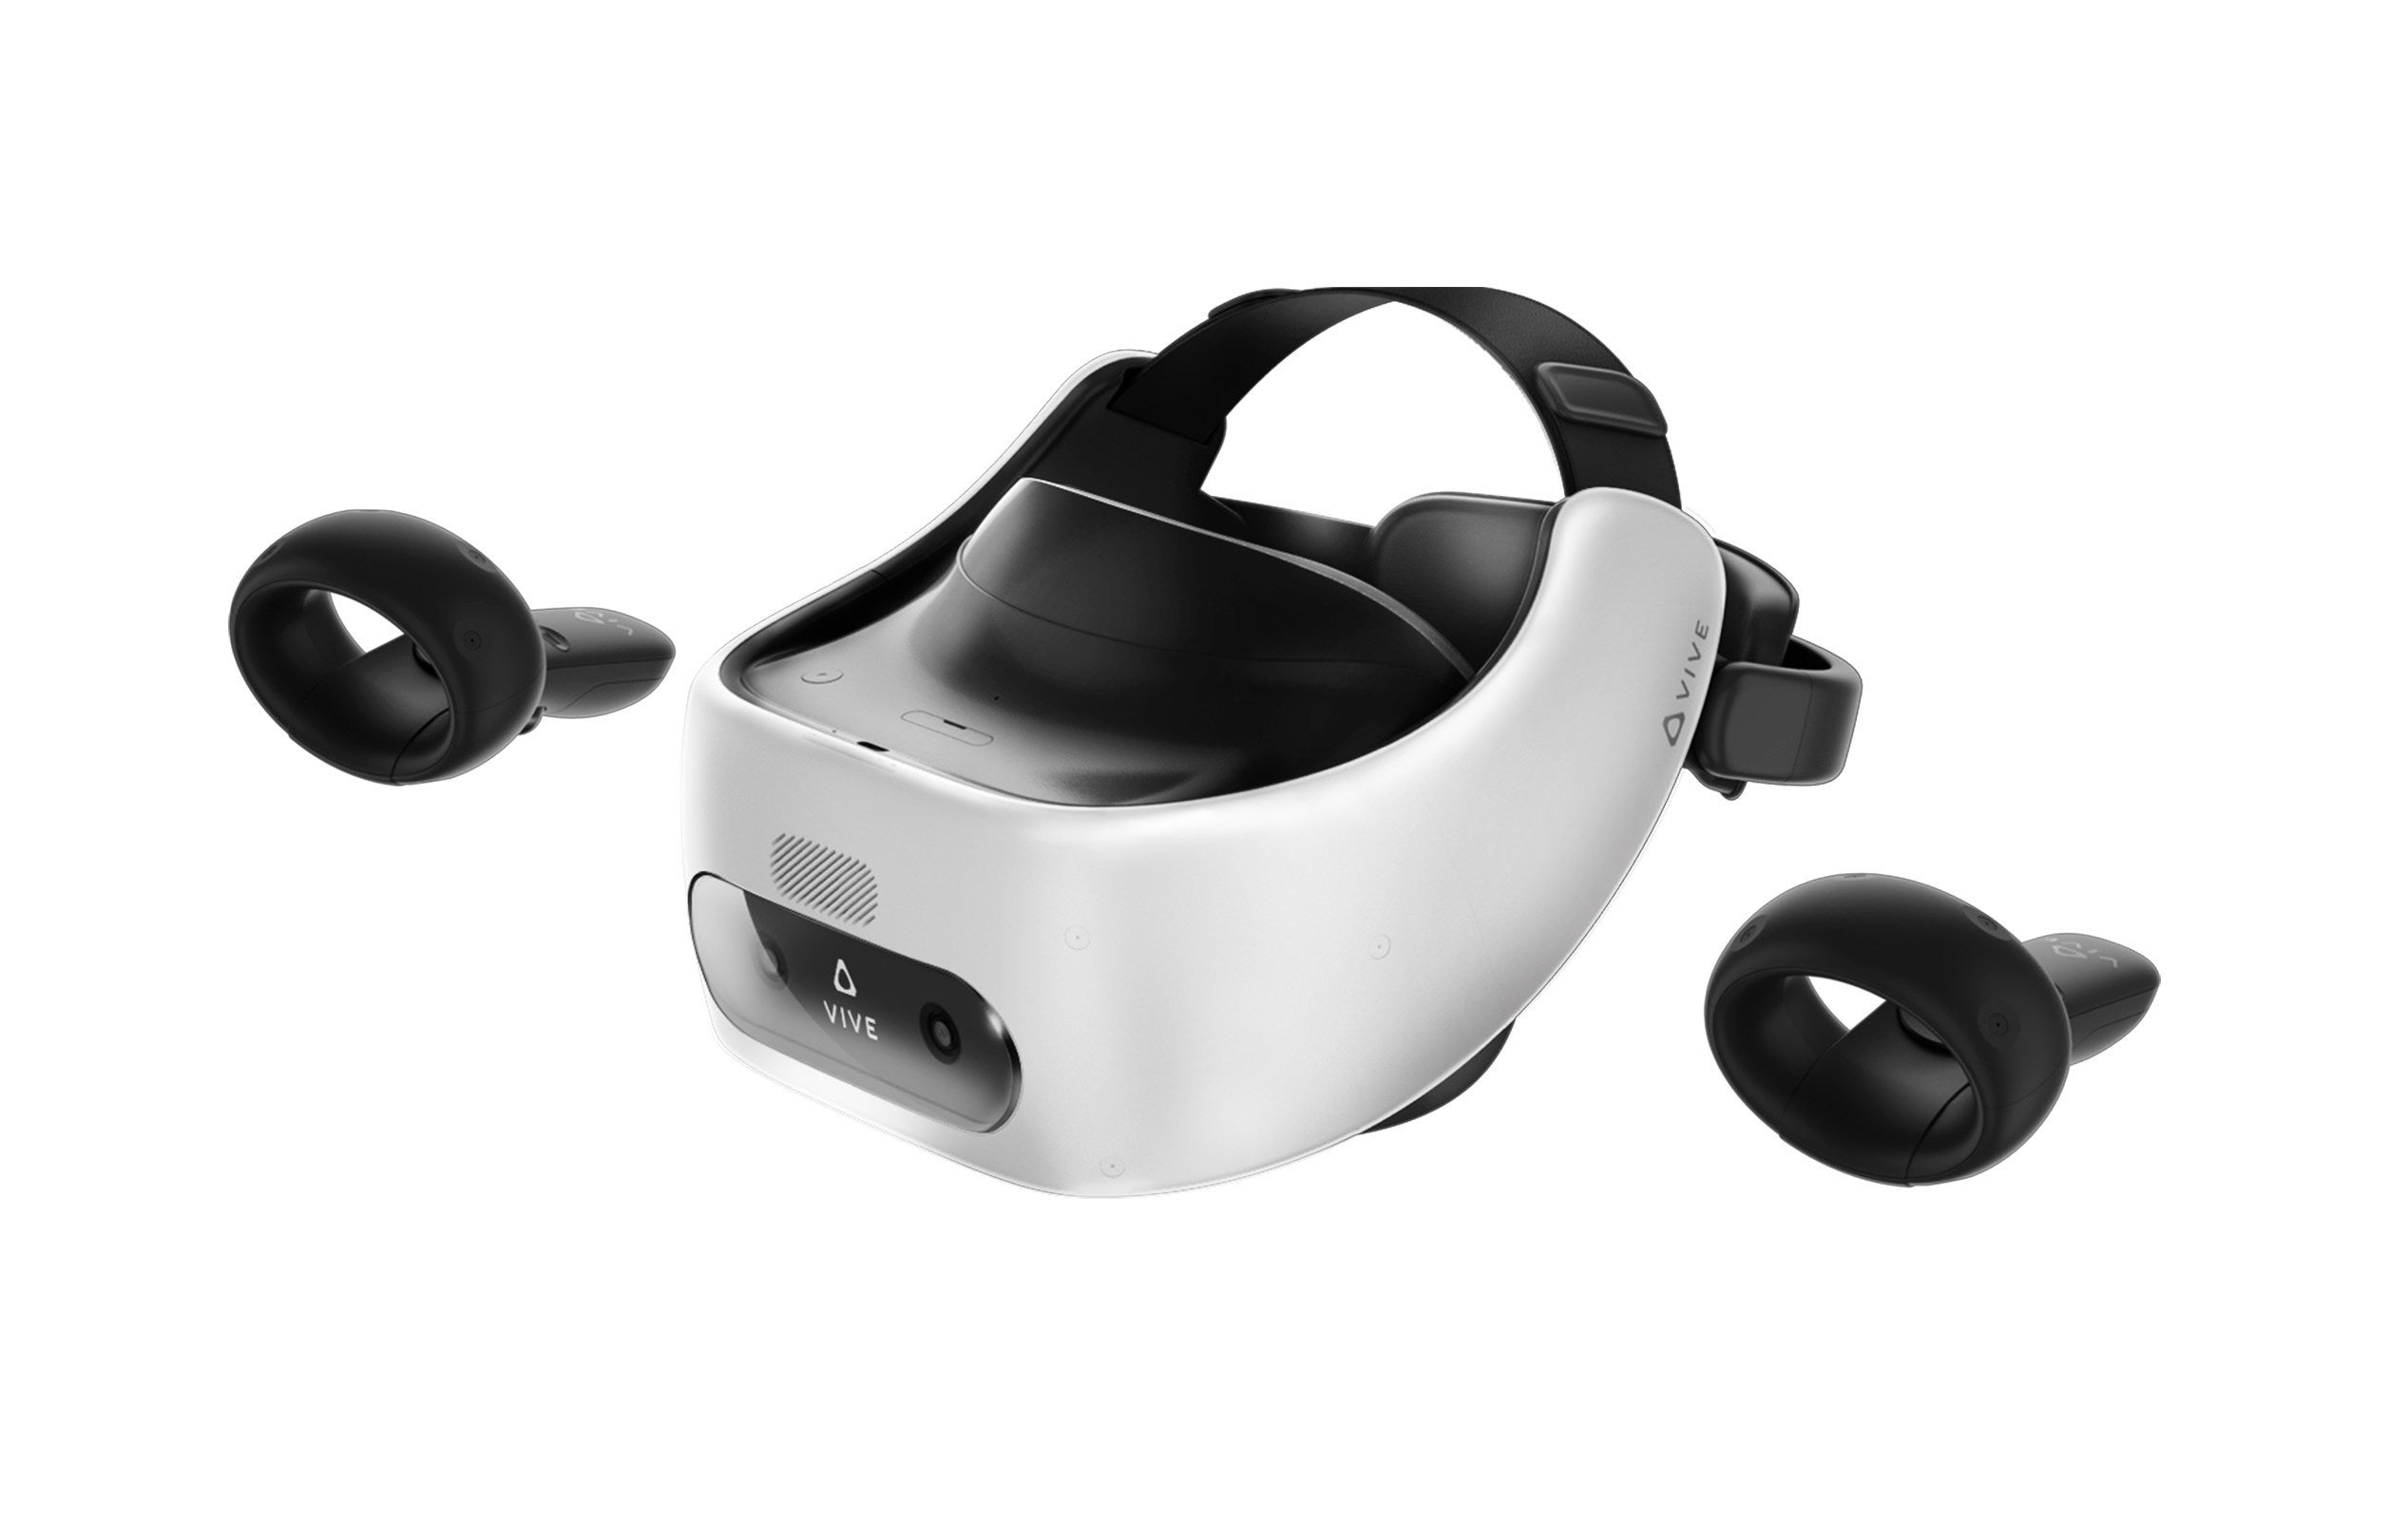 Standalone VR headset Vive Focus Plus announced by HTC Vive